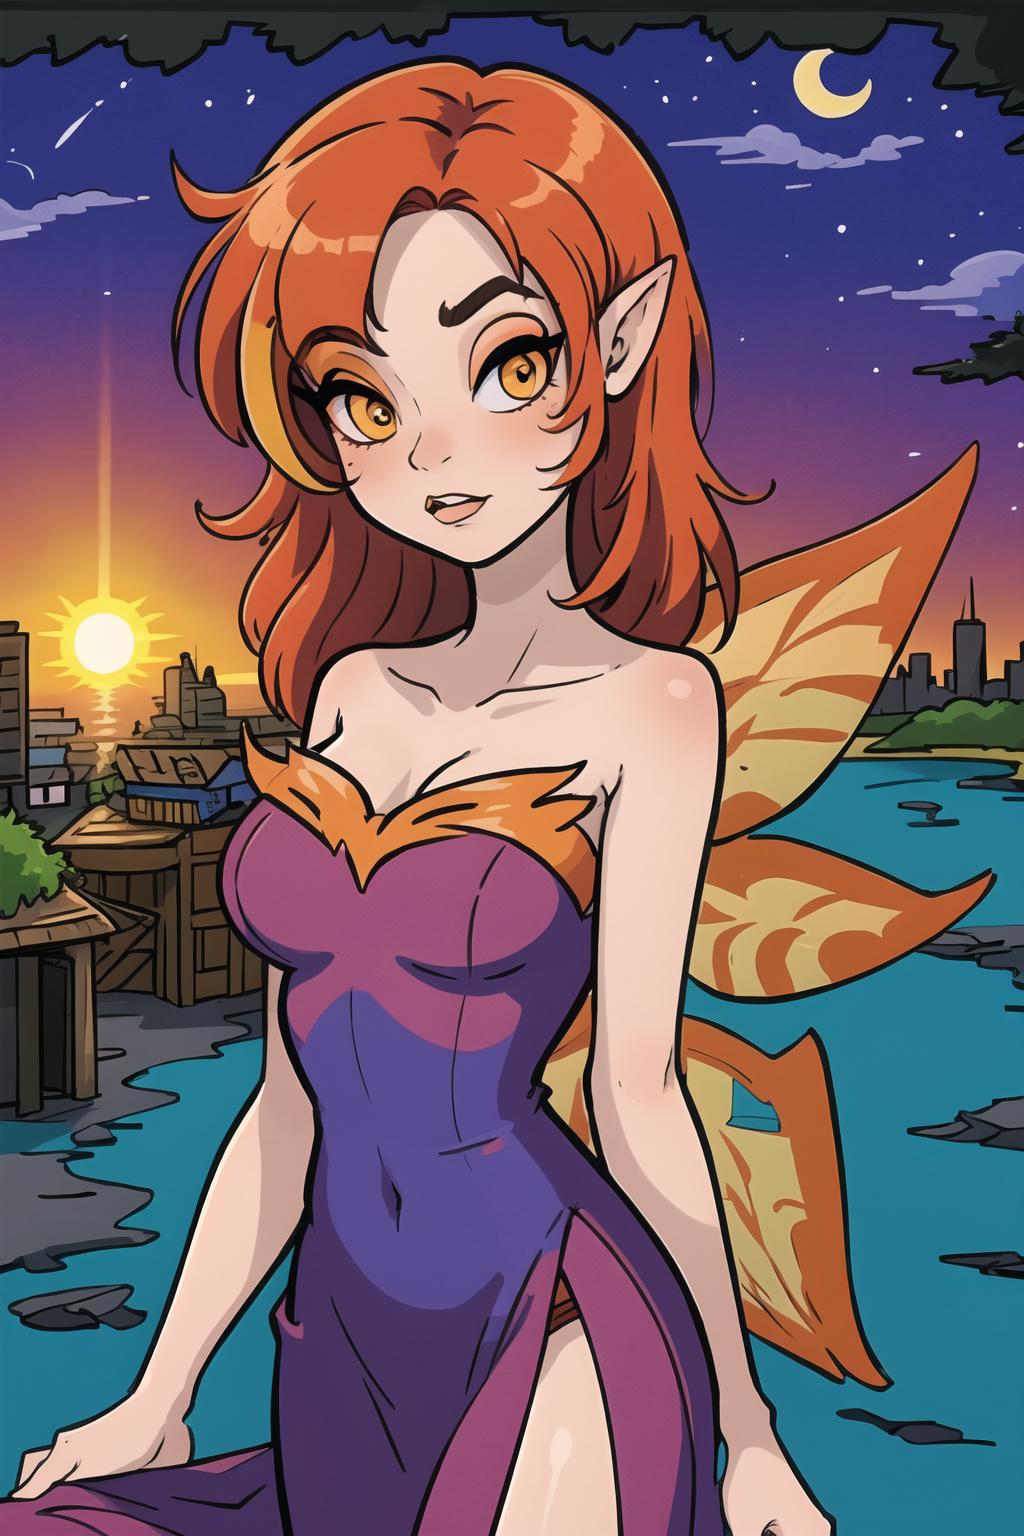 Fire Faerie - Neopets style fire fairy image by FaeFlan